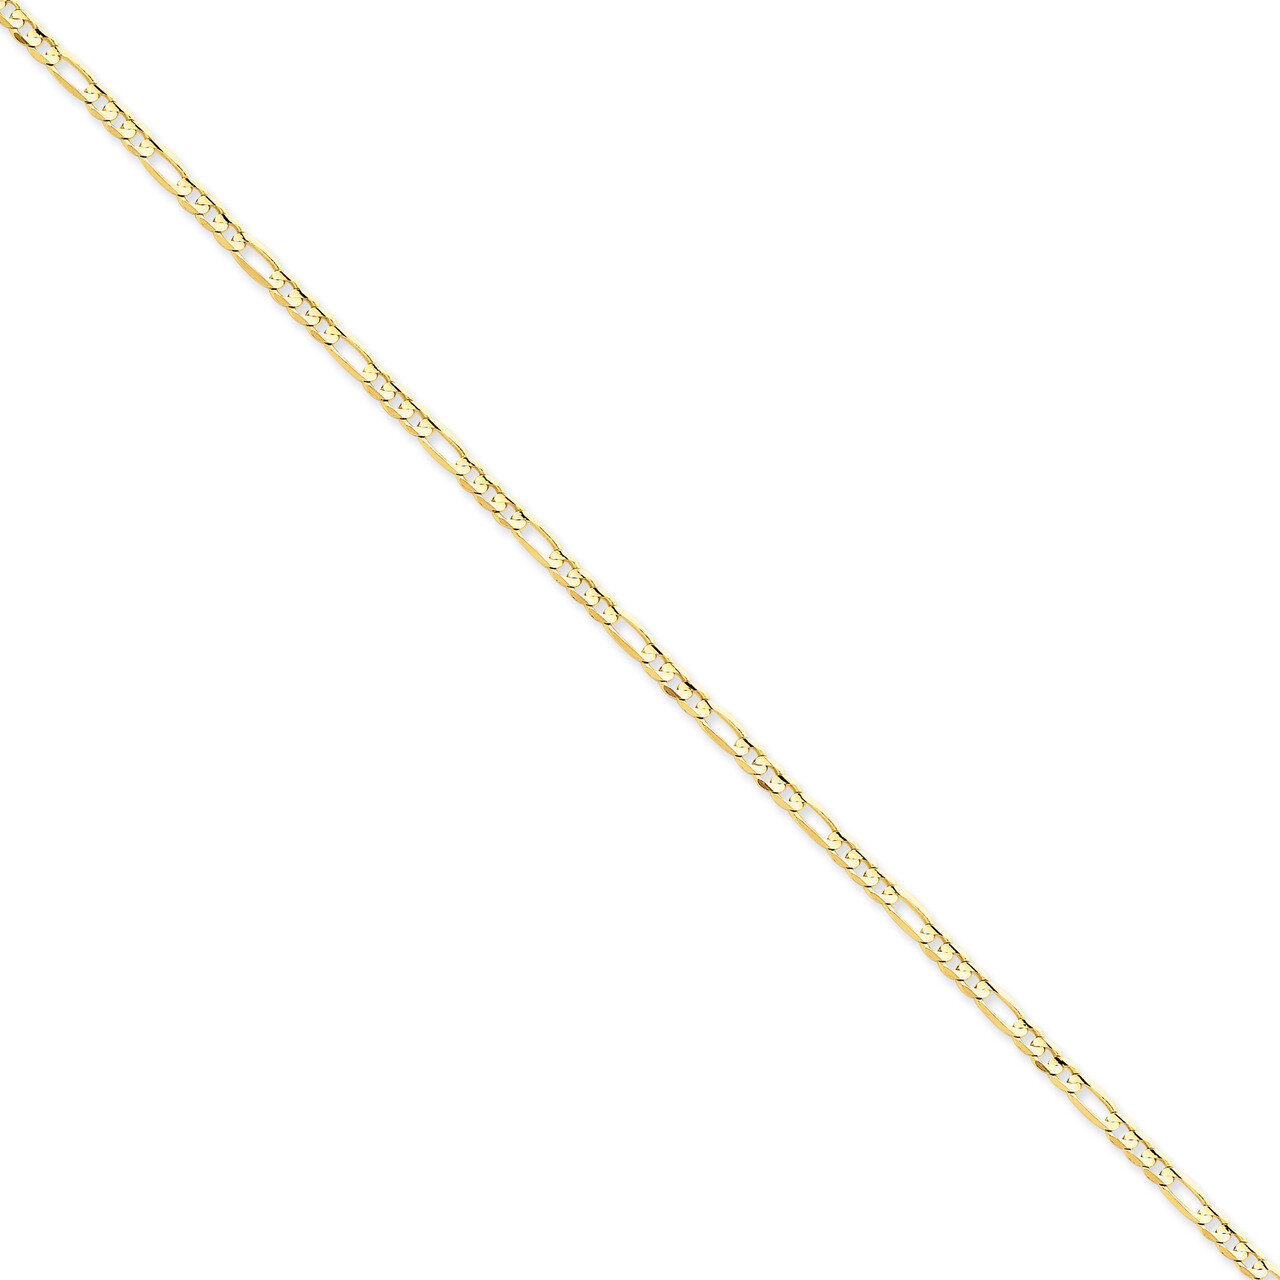 3mm Concave Open Figaro Chain 30 Inch 14k Gold LFG080-30